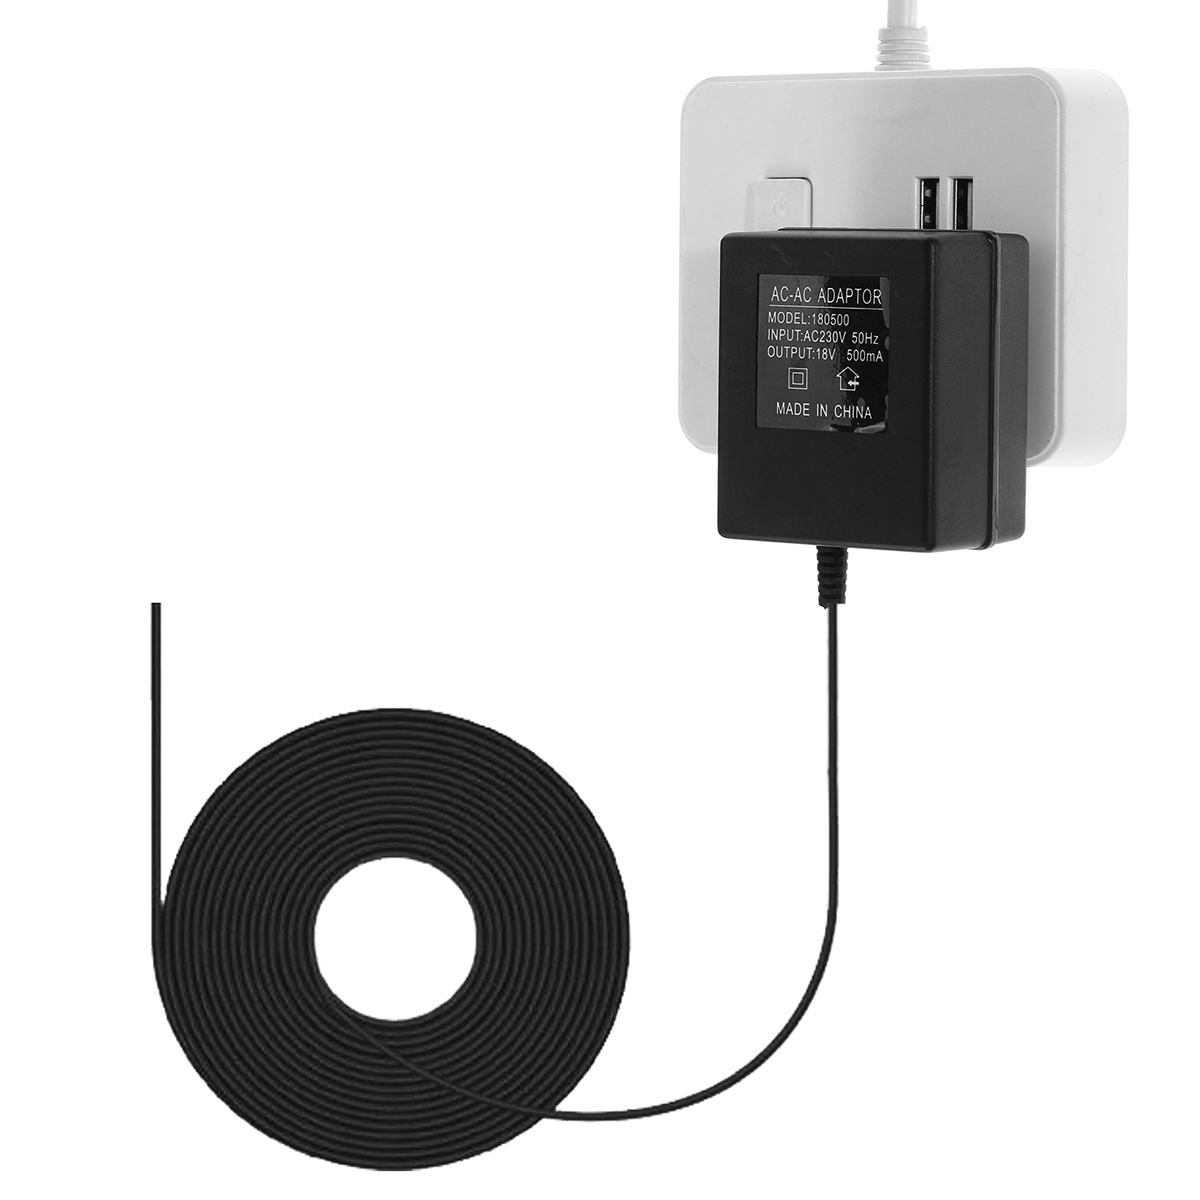 7m-Cable-AU-Plug-Adapter-for-Rring-Video-Doorbell-230V-to-18V-500ma-1587262-2